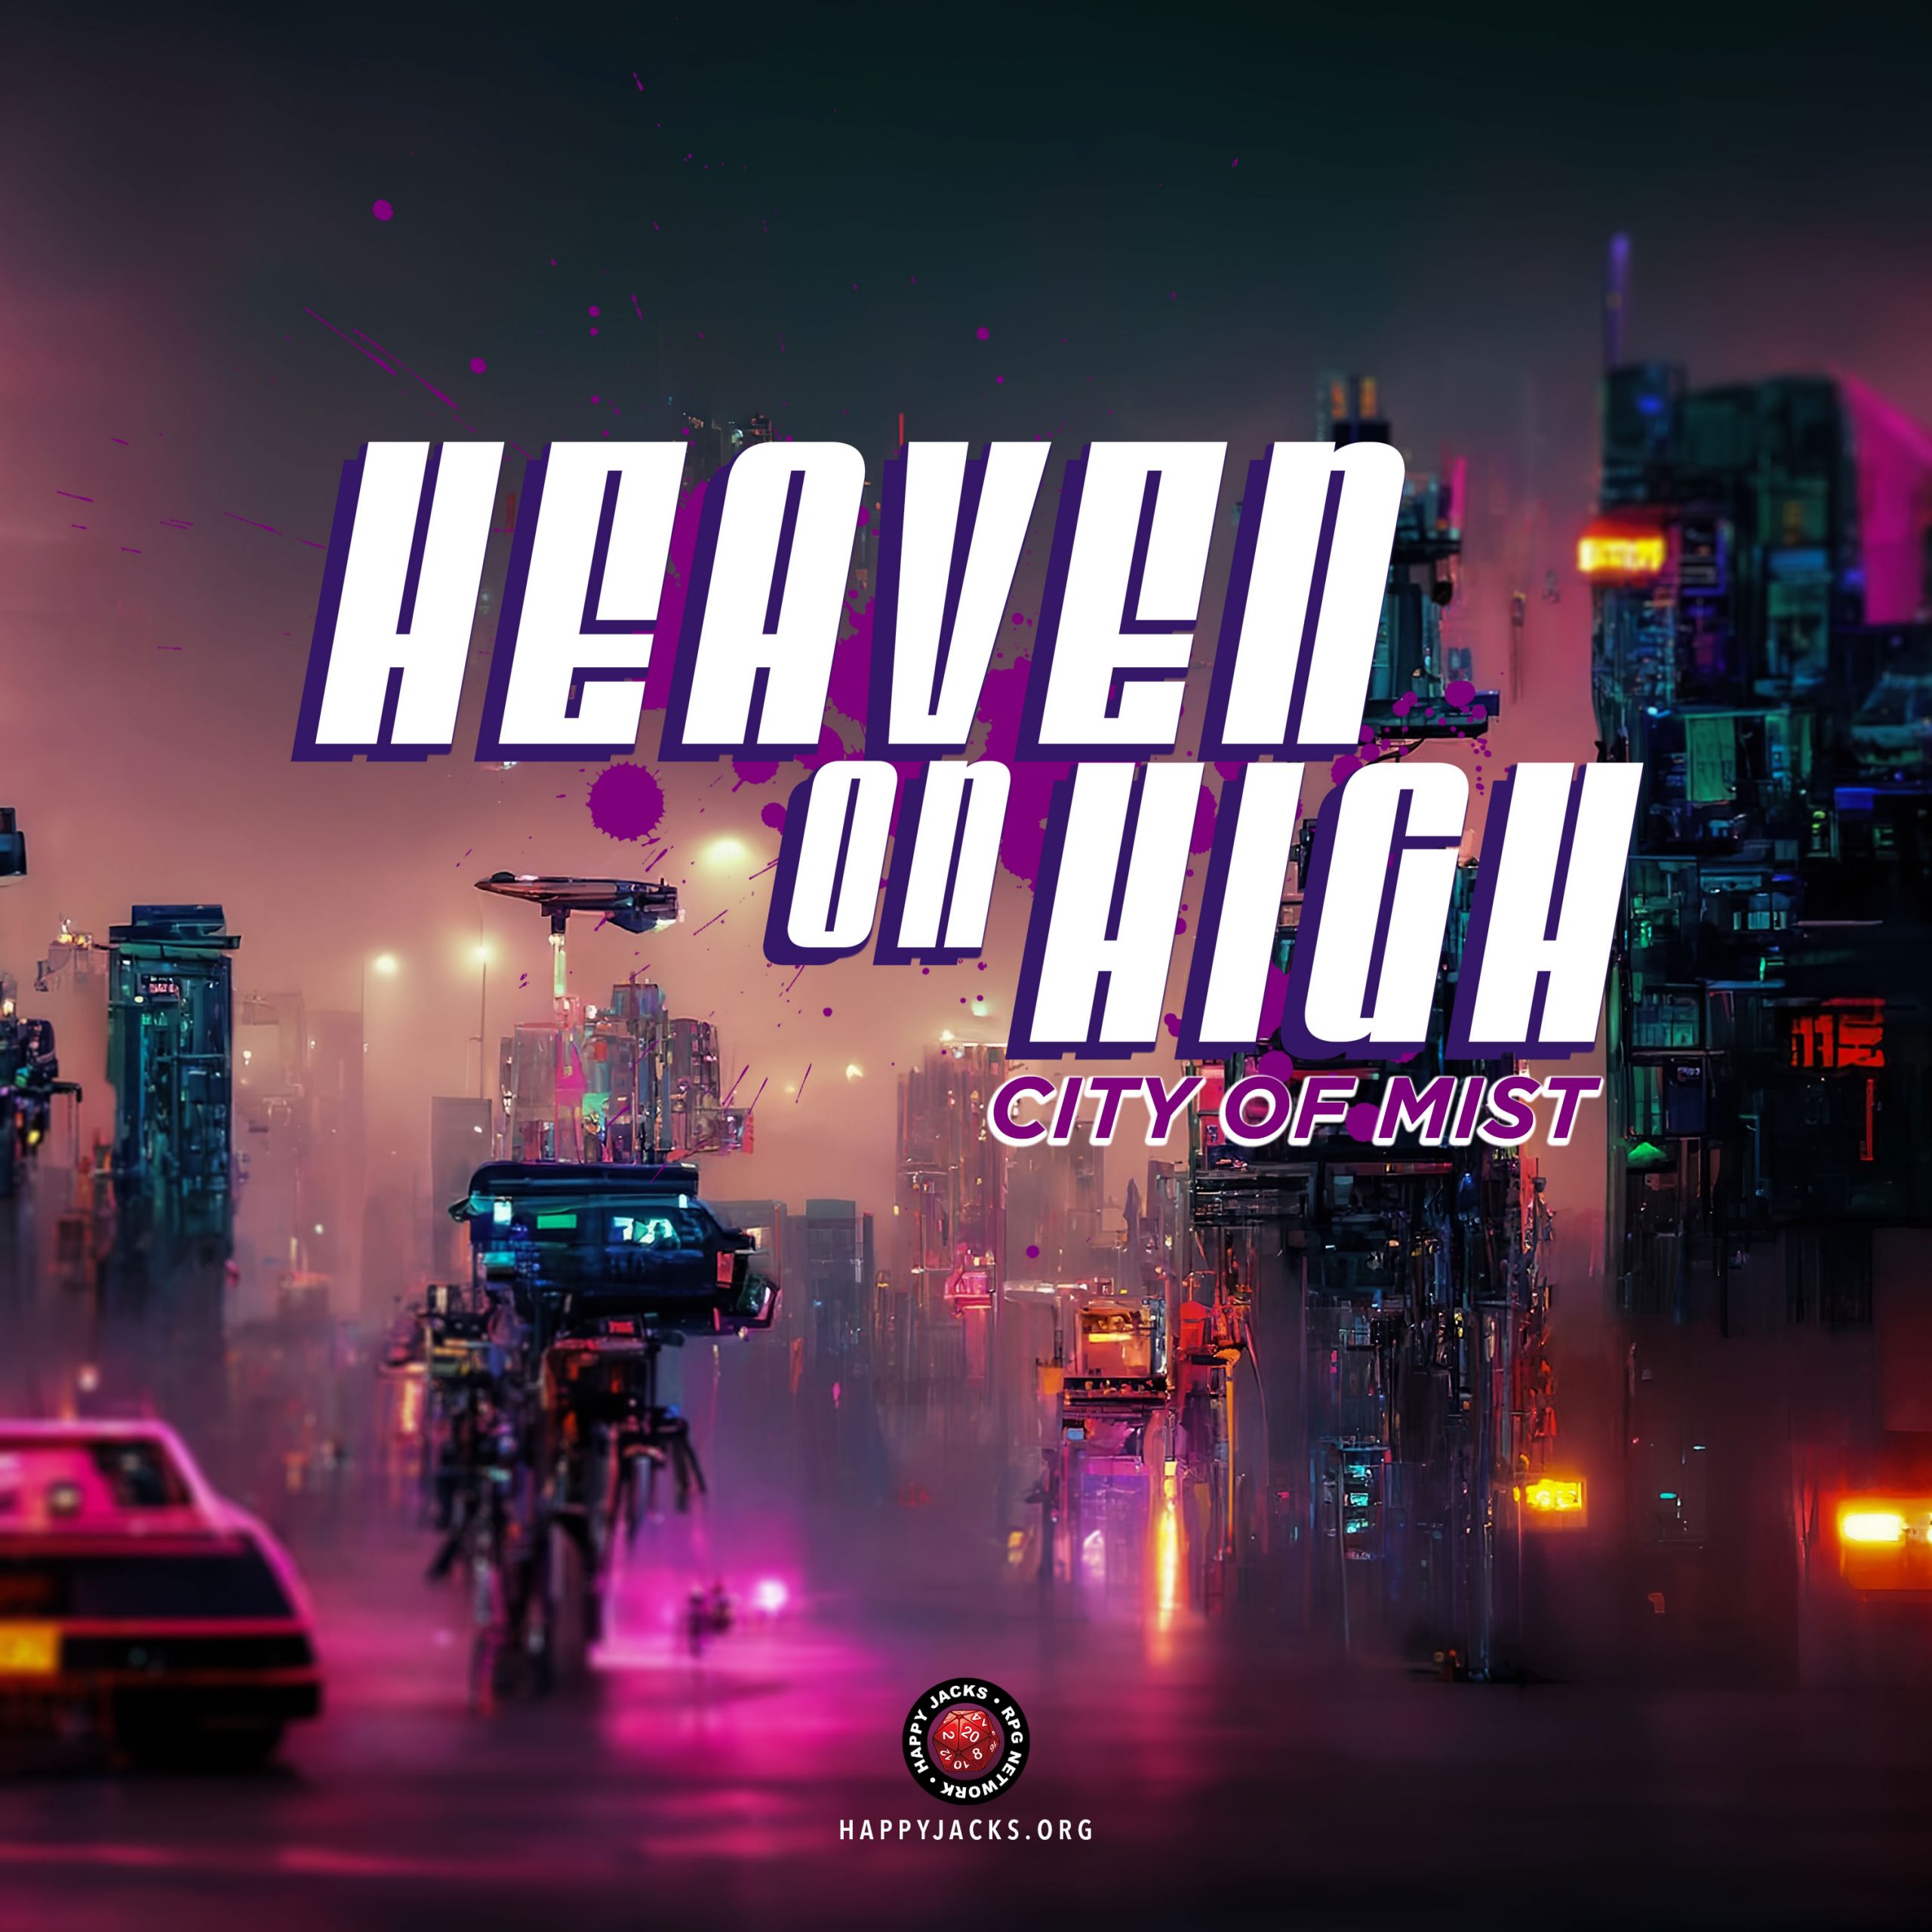 HEAVEN06 Out of Action | Heaven on High | City of Mist